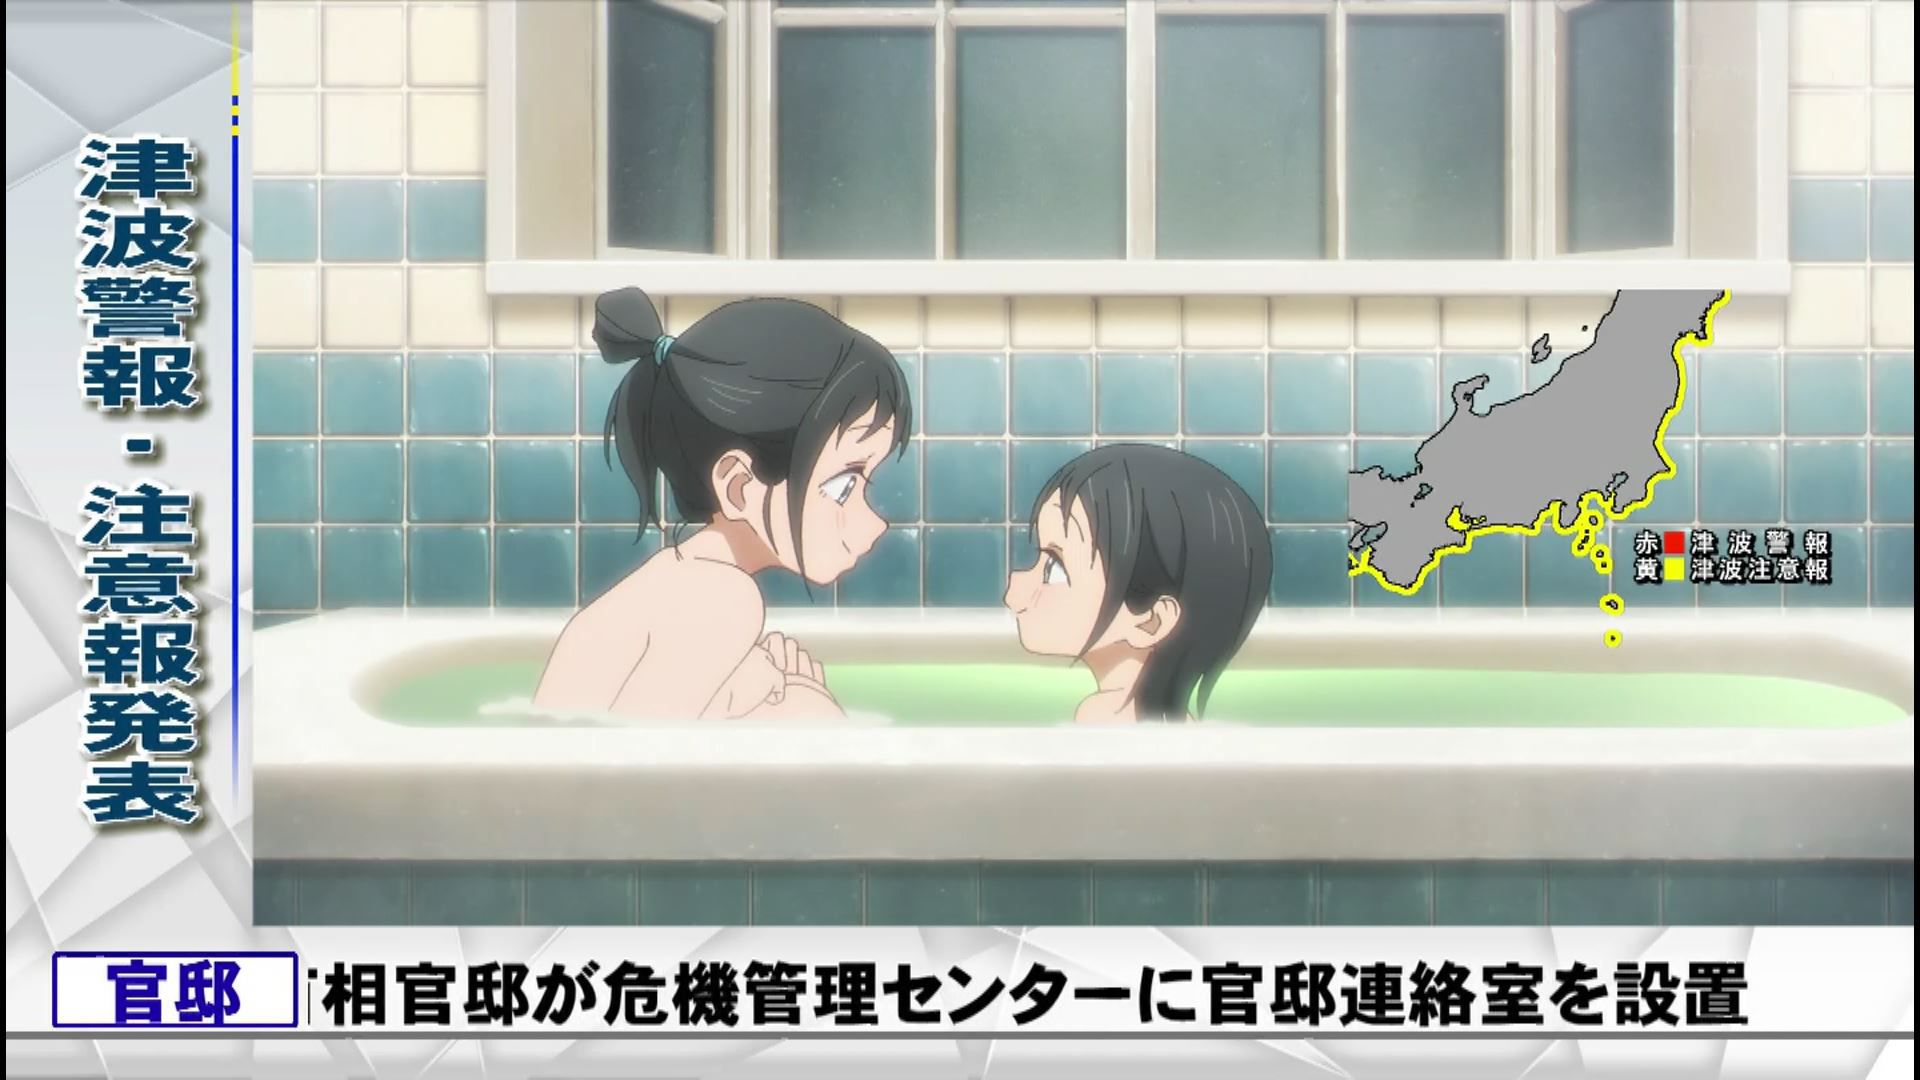 In the anime "Tomorrow-chan's Sailor Suit" episode 2, the girl's erotic bathing scene and the punchy scene 25